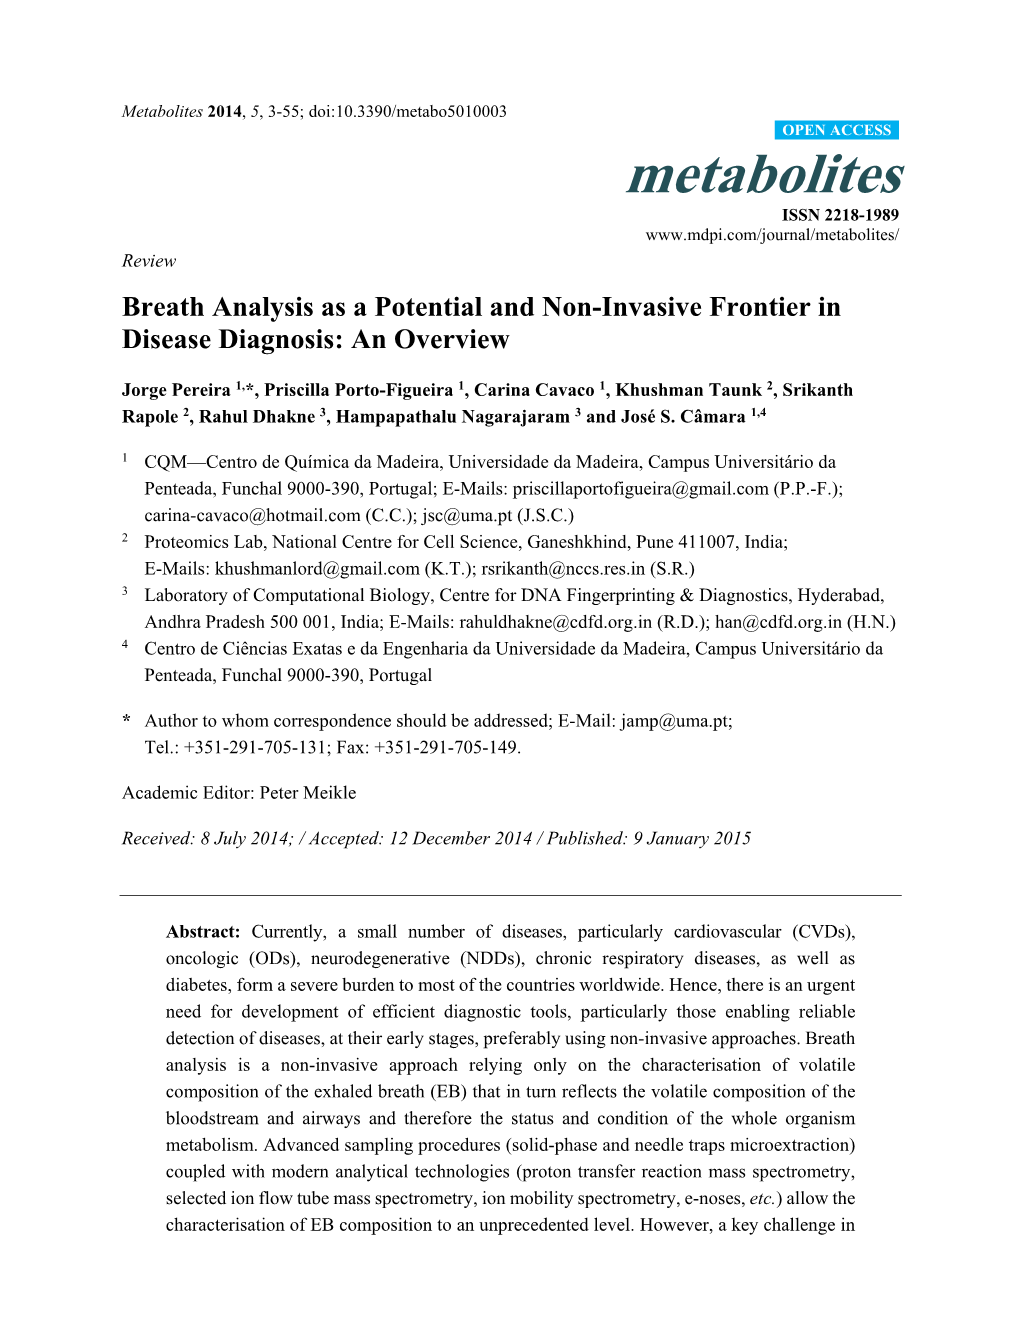 Breath Analysis As a Potential and Non-Invasive Frontier in Disease Diagnosis: an Overview